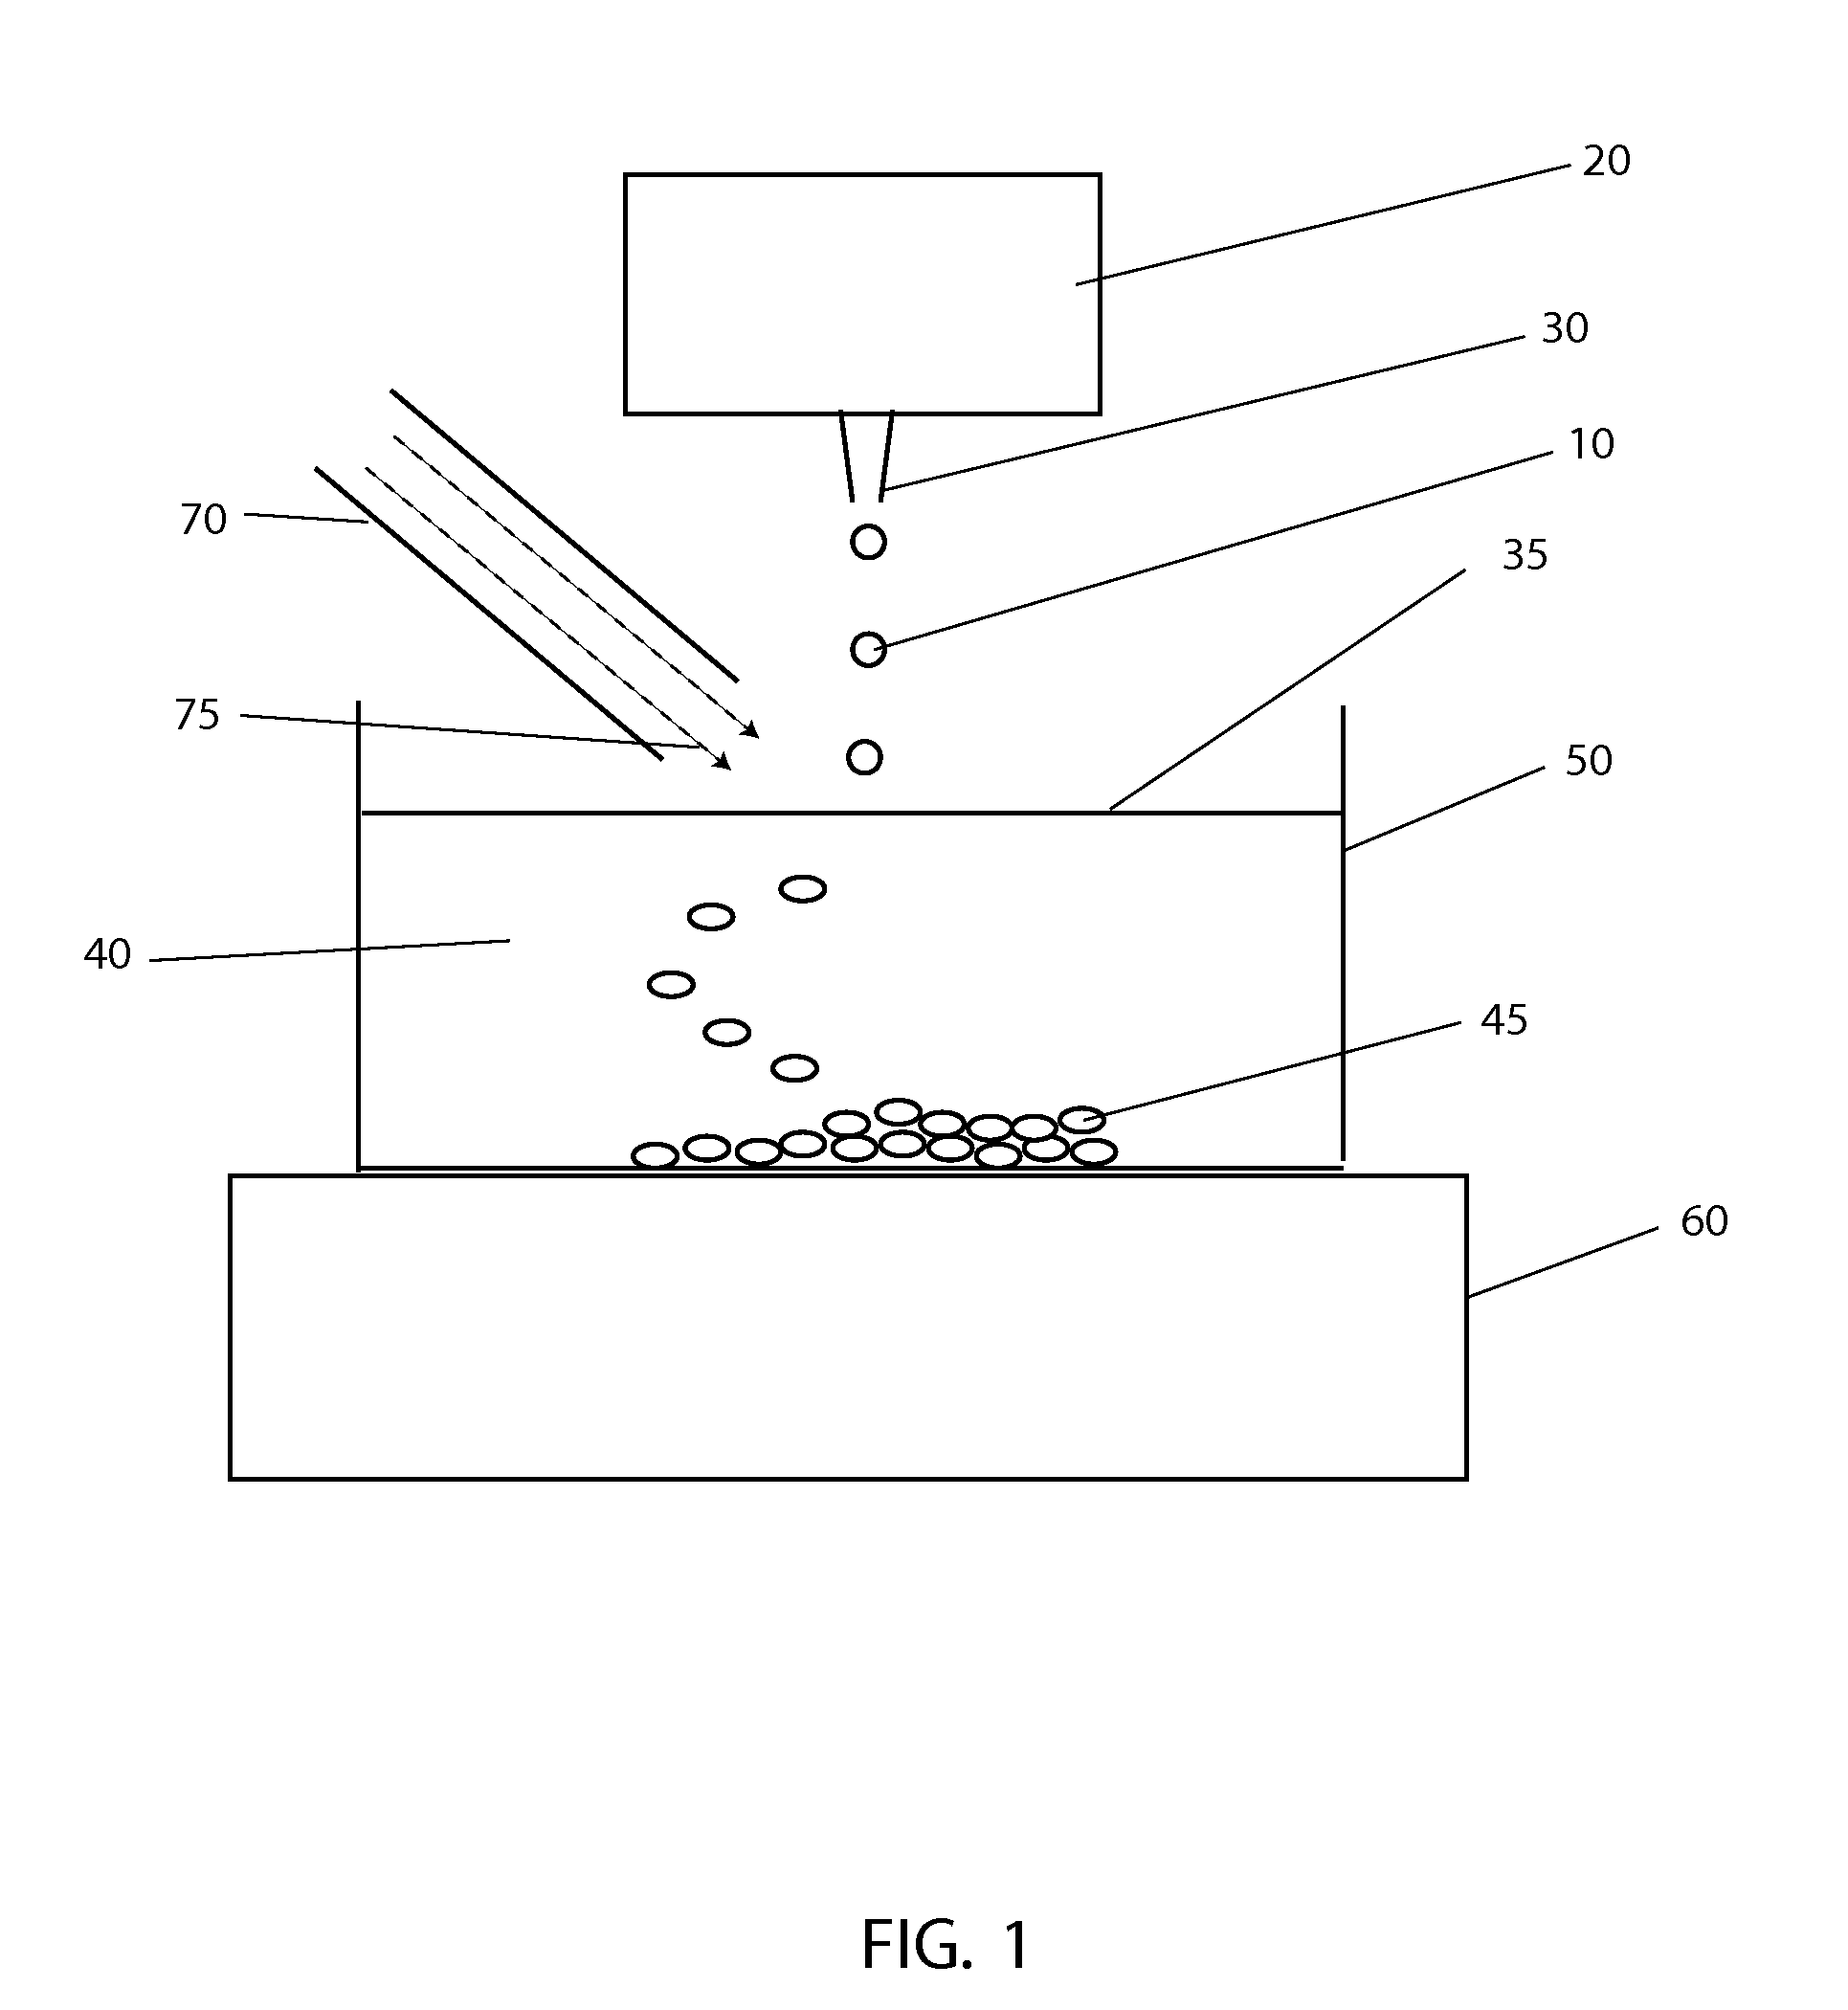 Systems for Increased Cooling and Thawing Rates of Protein Solutions and Cells for Optimized Cryopreservation and Recovery